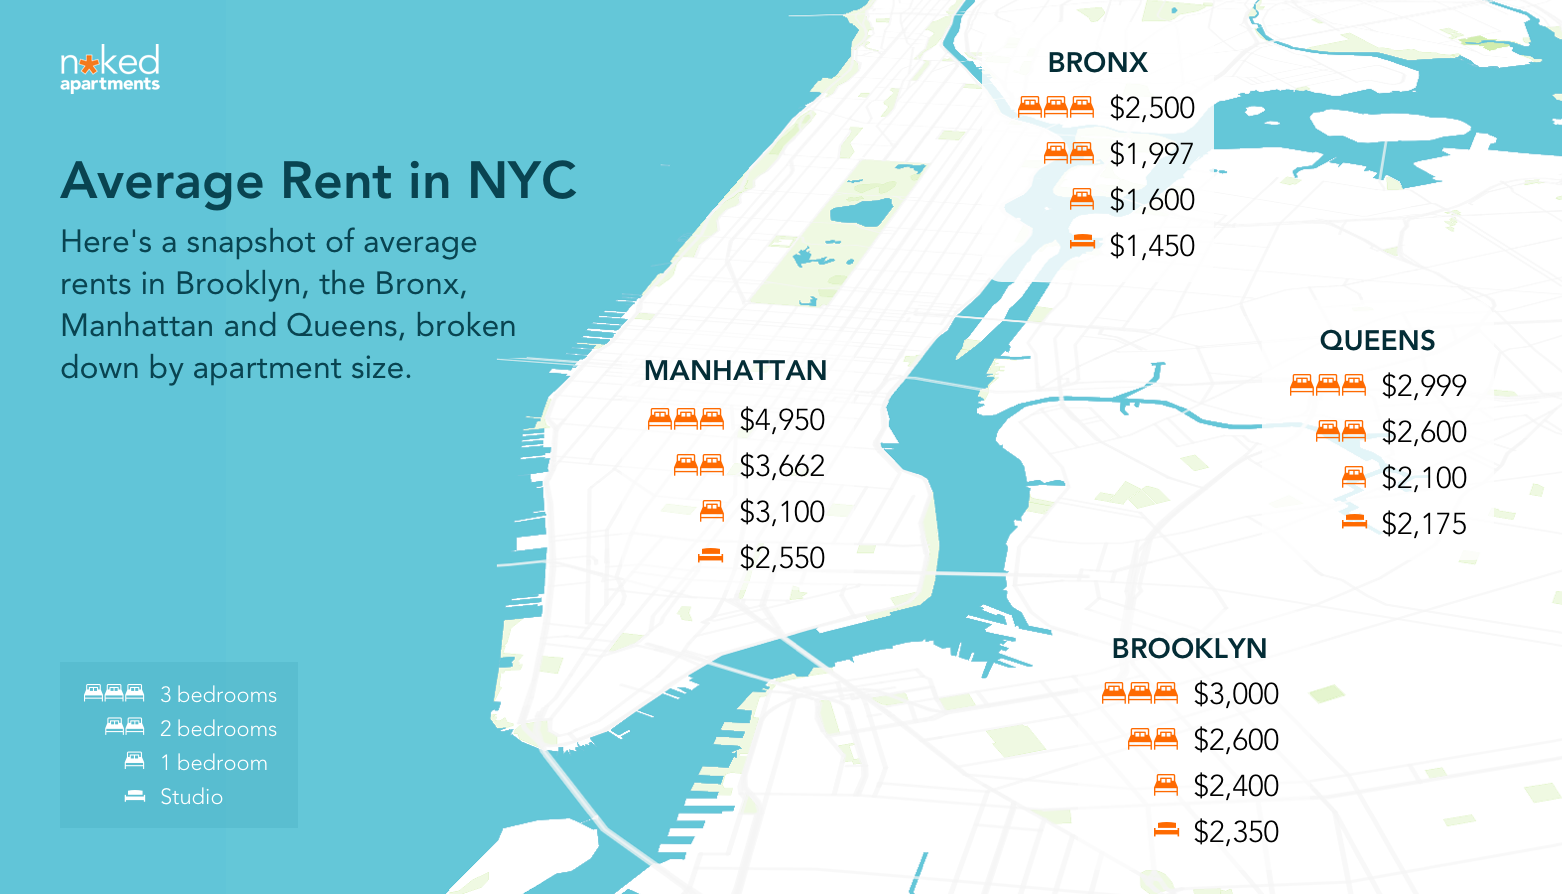 How much is rent in new york per month